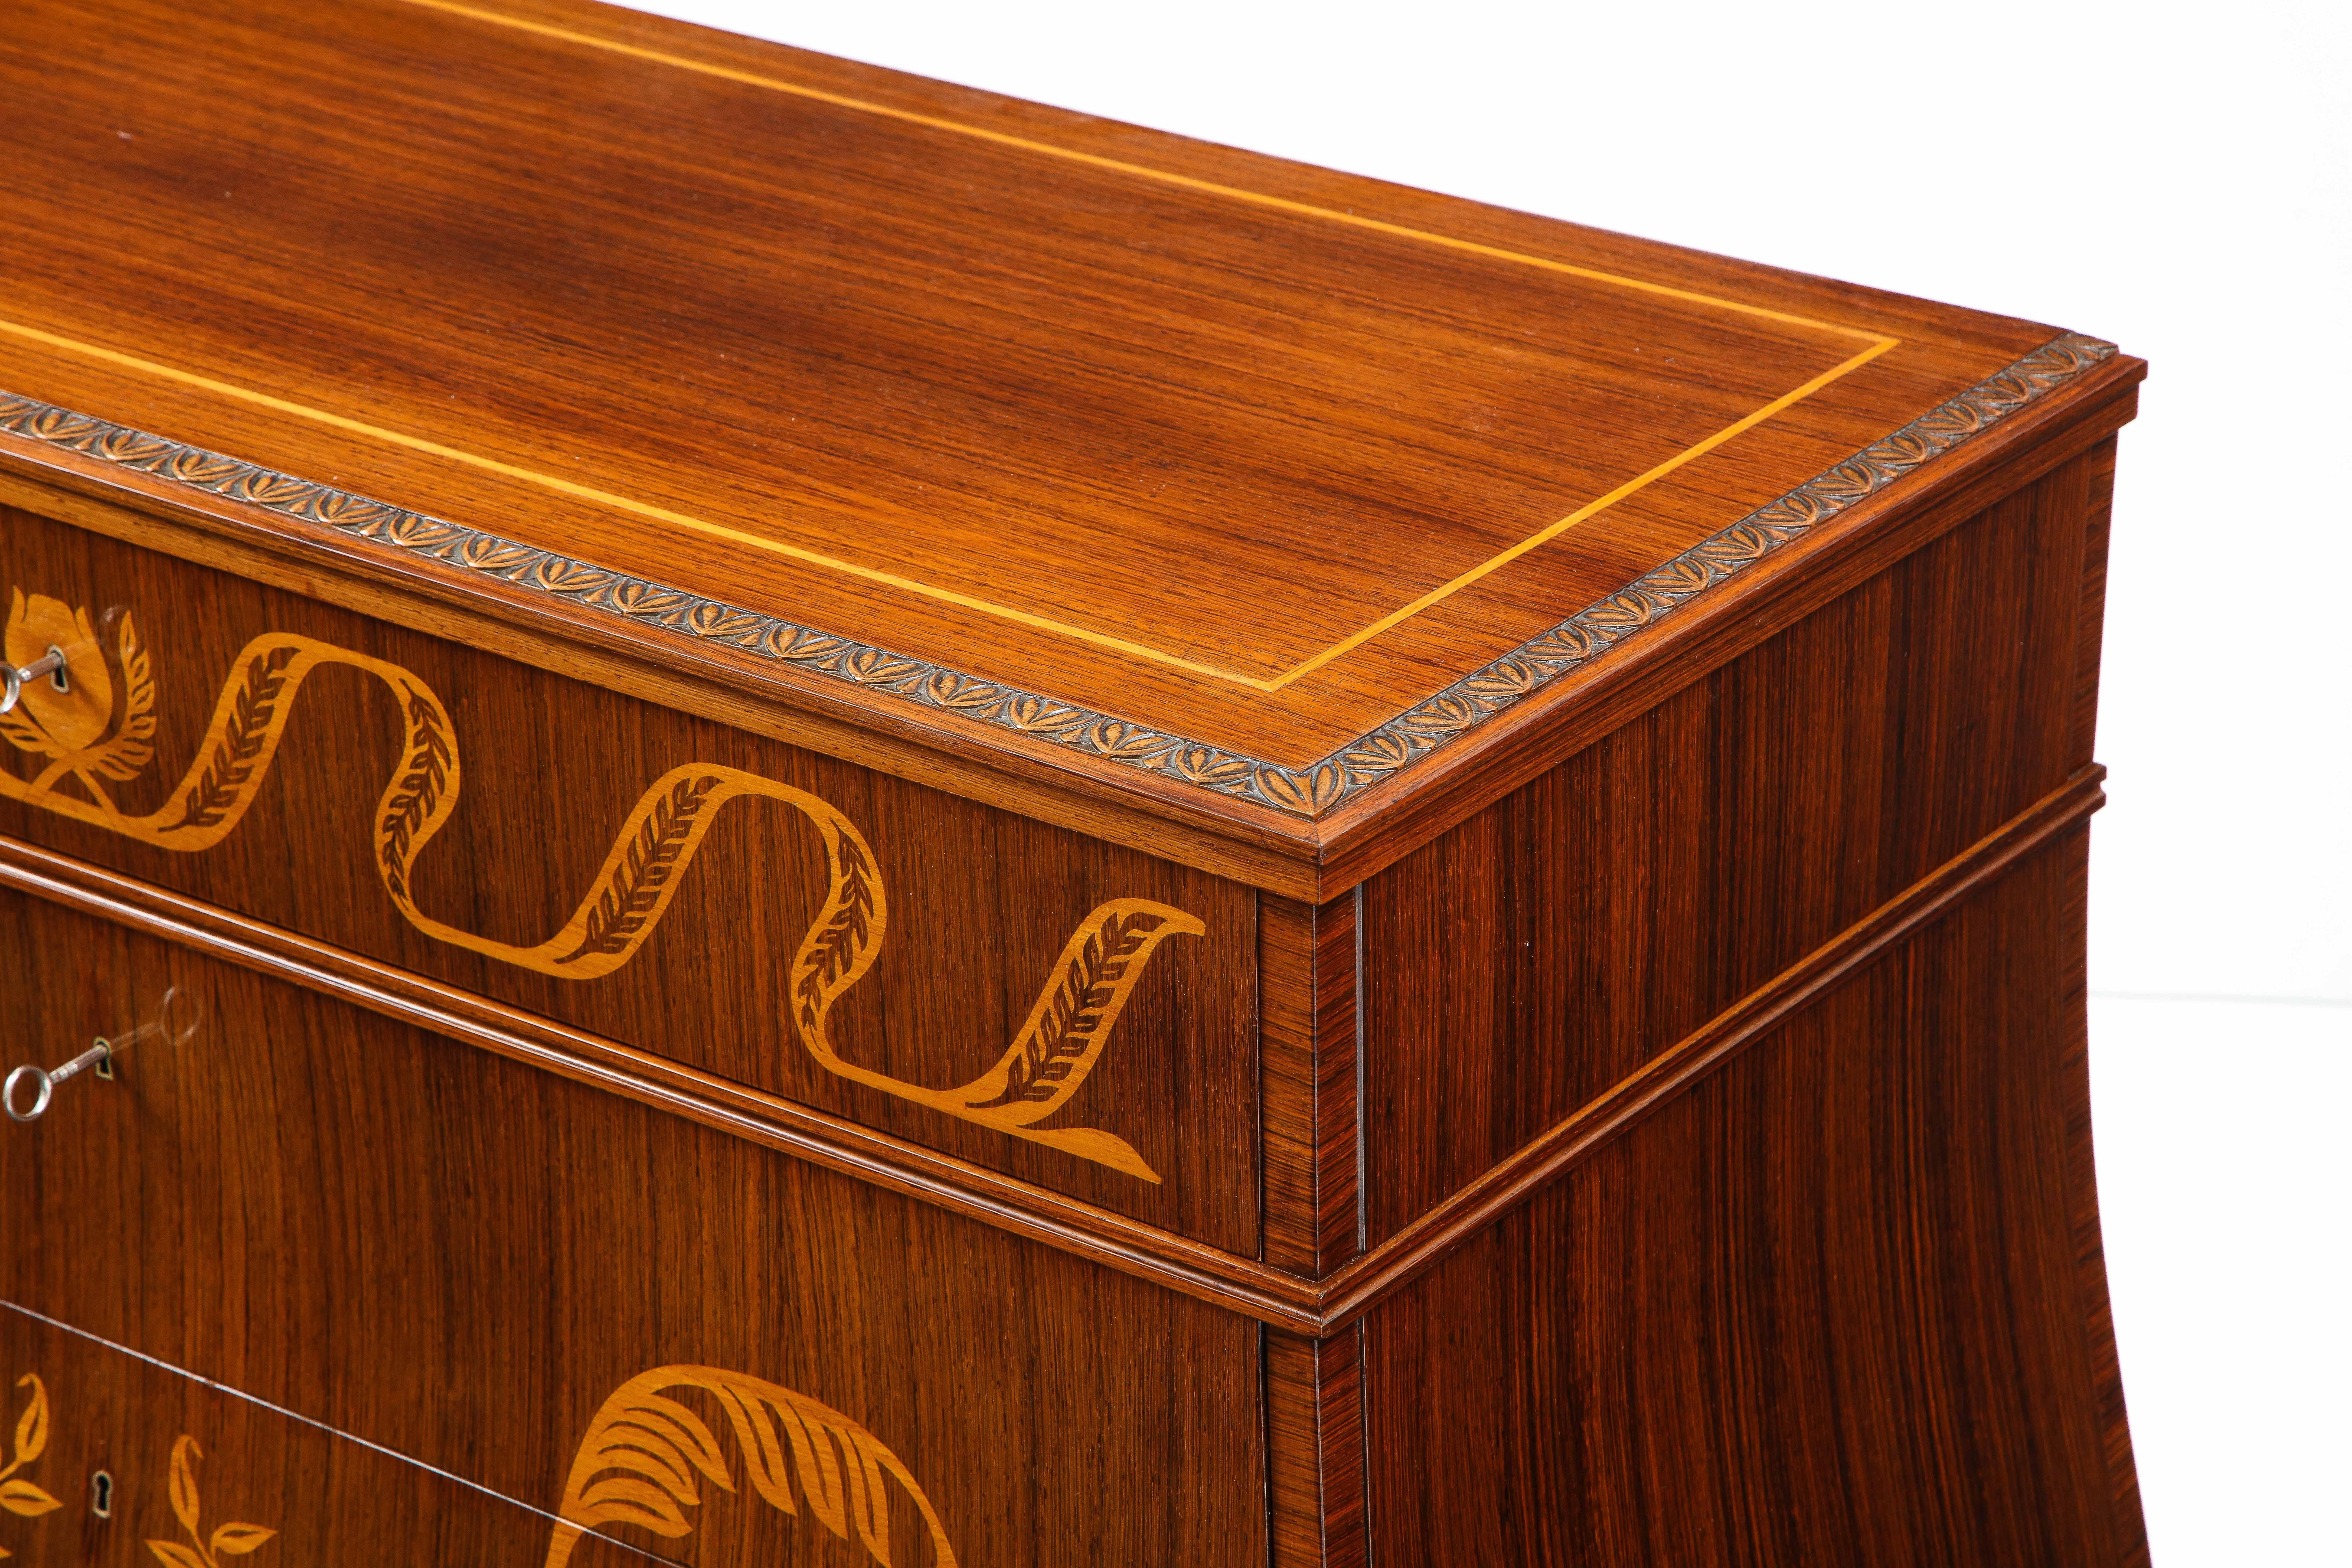 Swedish Grace Fruitwood Inlaid Rosewood Chest of Drawers, Circa 1930-40 3